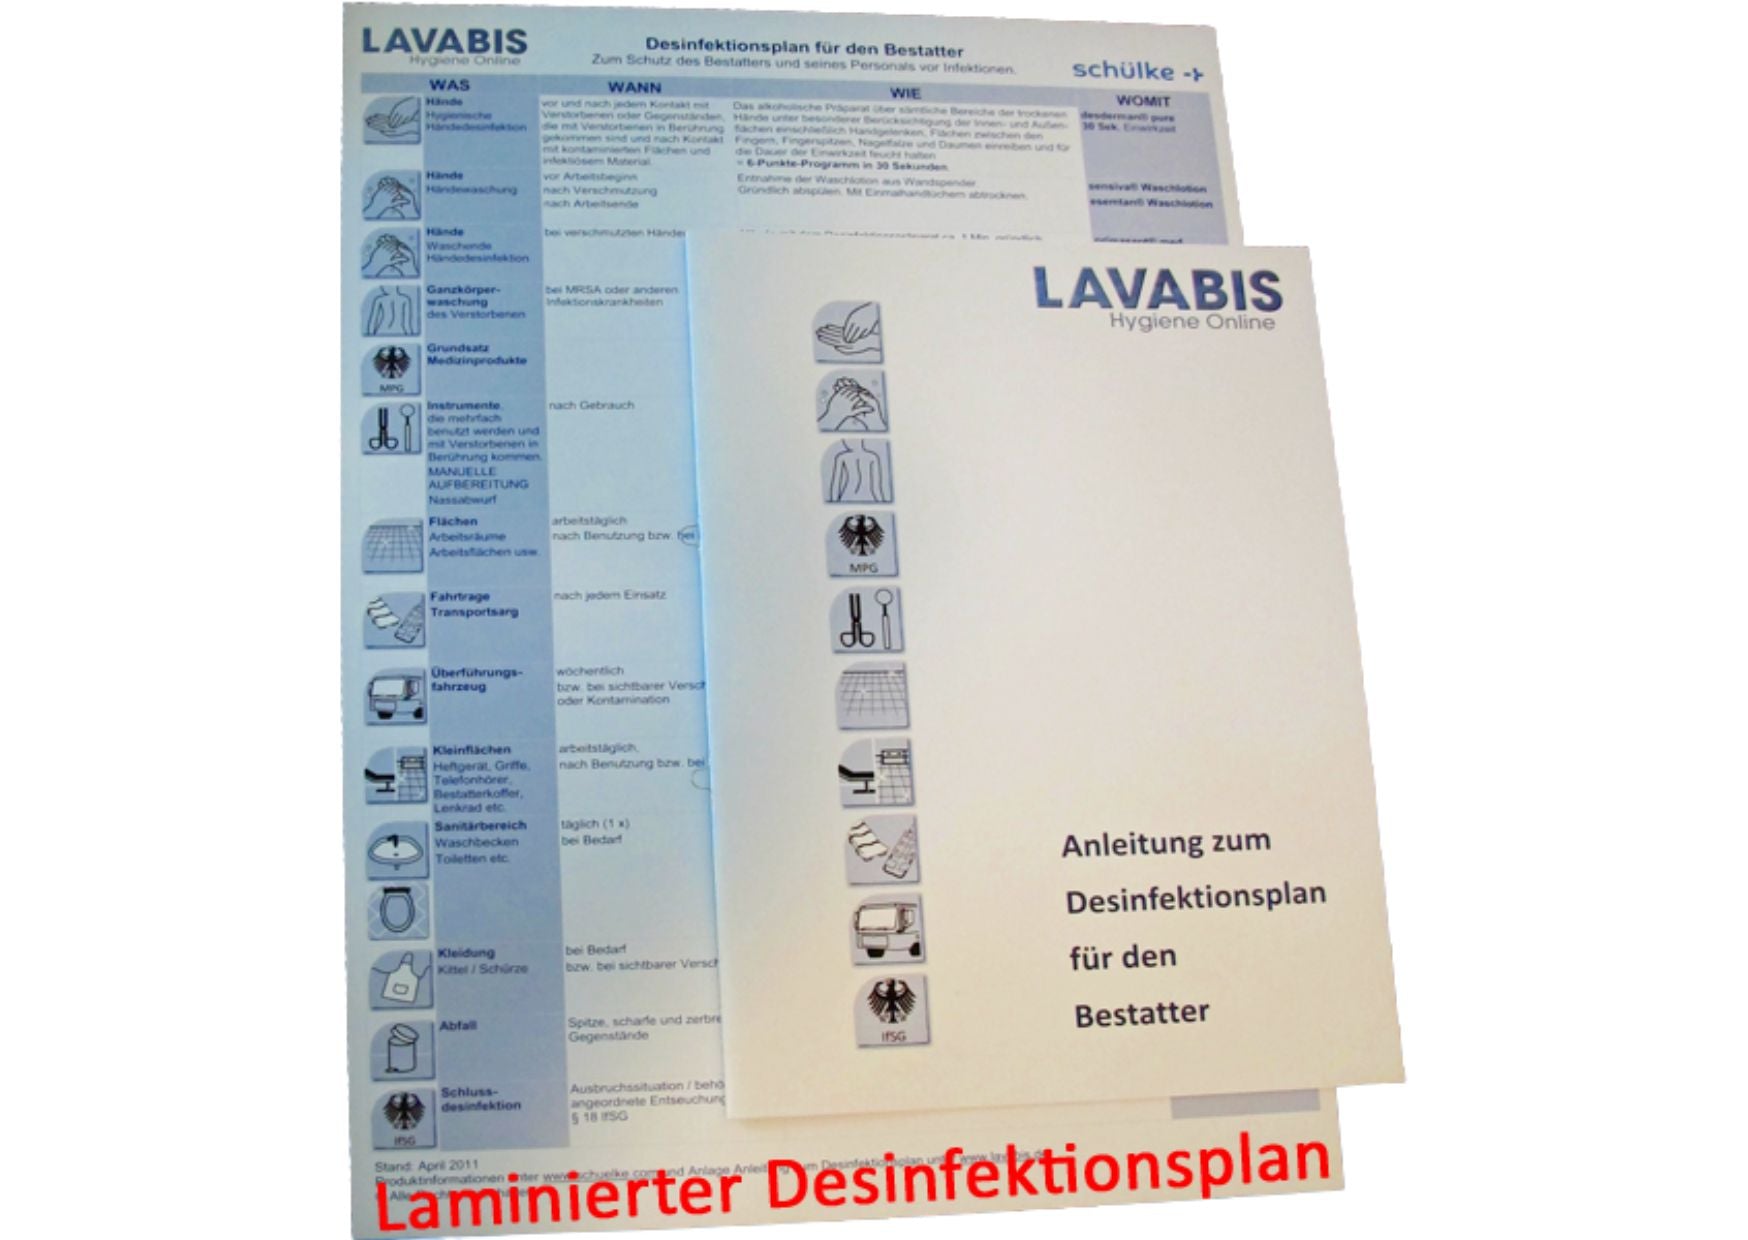 Disinfection plan for morticians - Optimum laminated